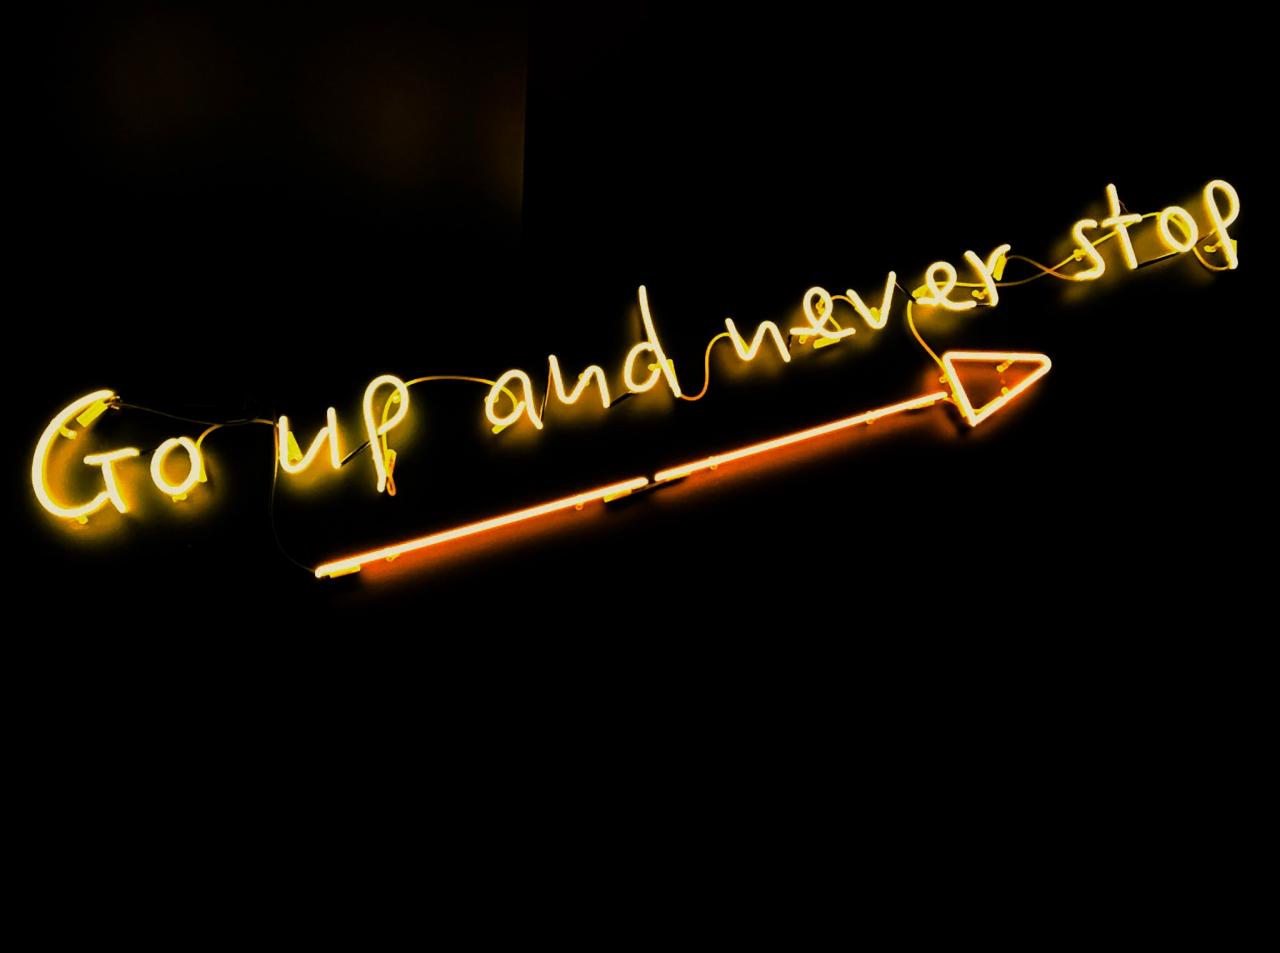 Yellow neon sign that says, "Go up and never stop."